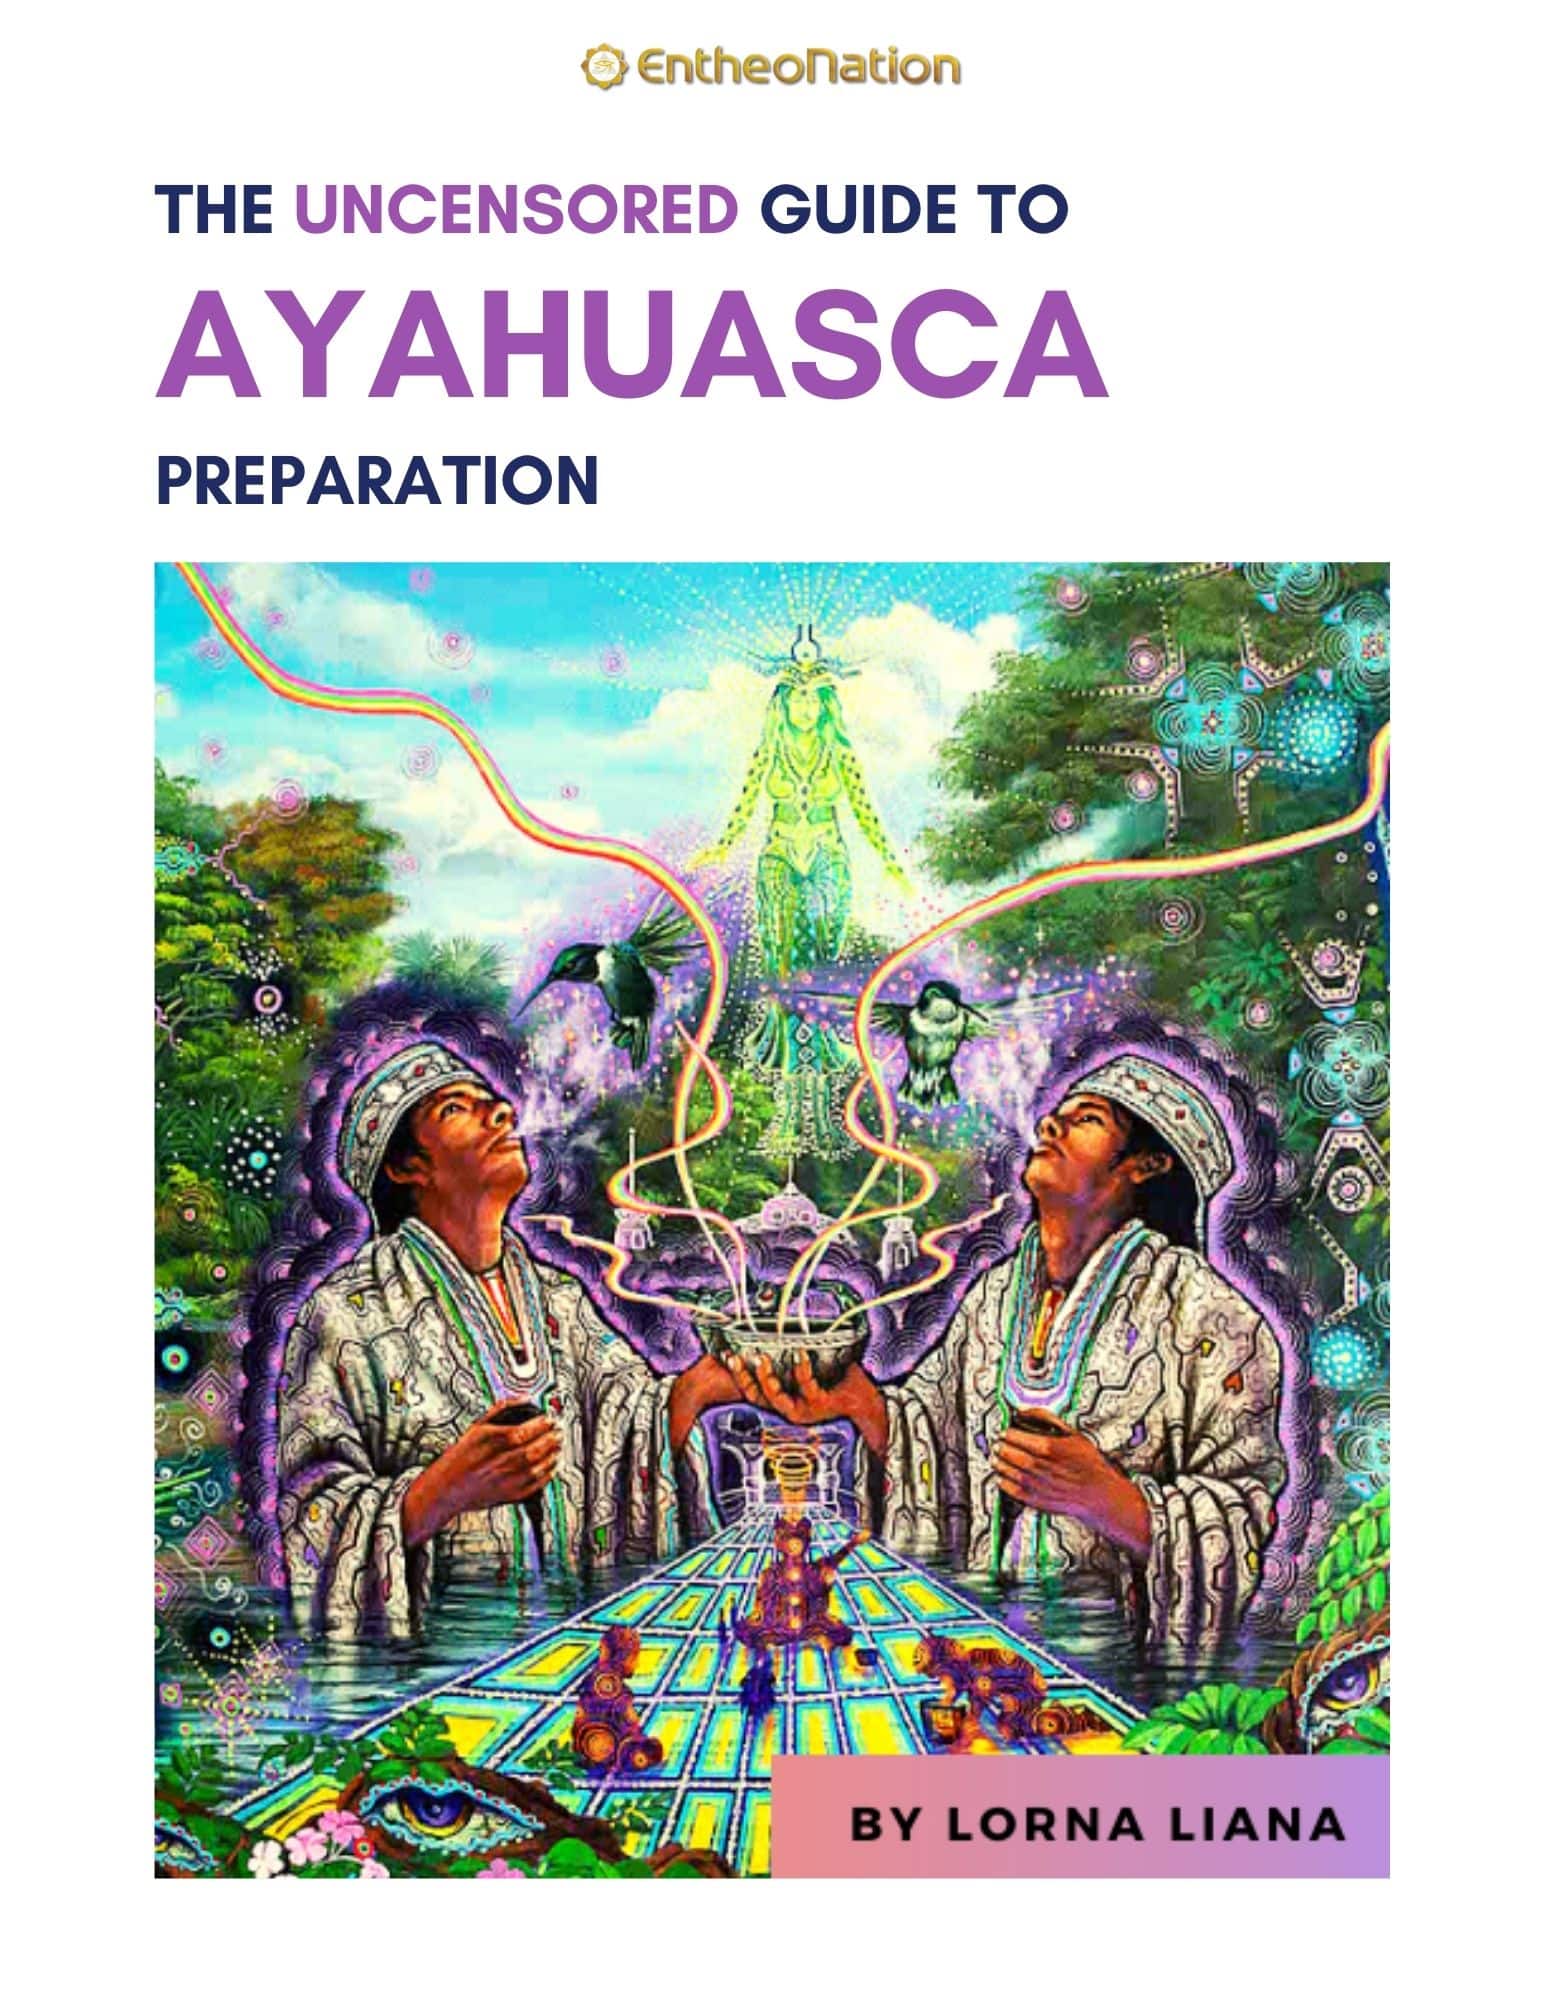 The-Uncensored-Guide-to-Ayahuasca-Preparation-Cover